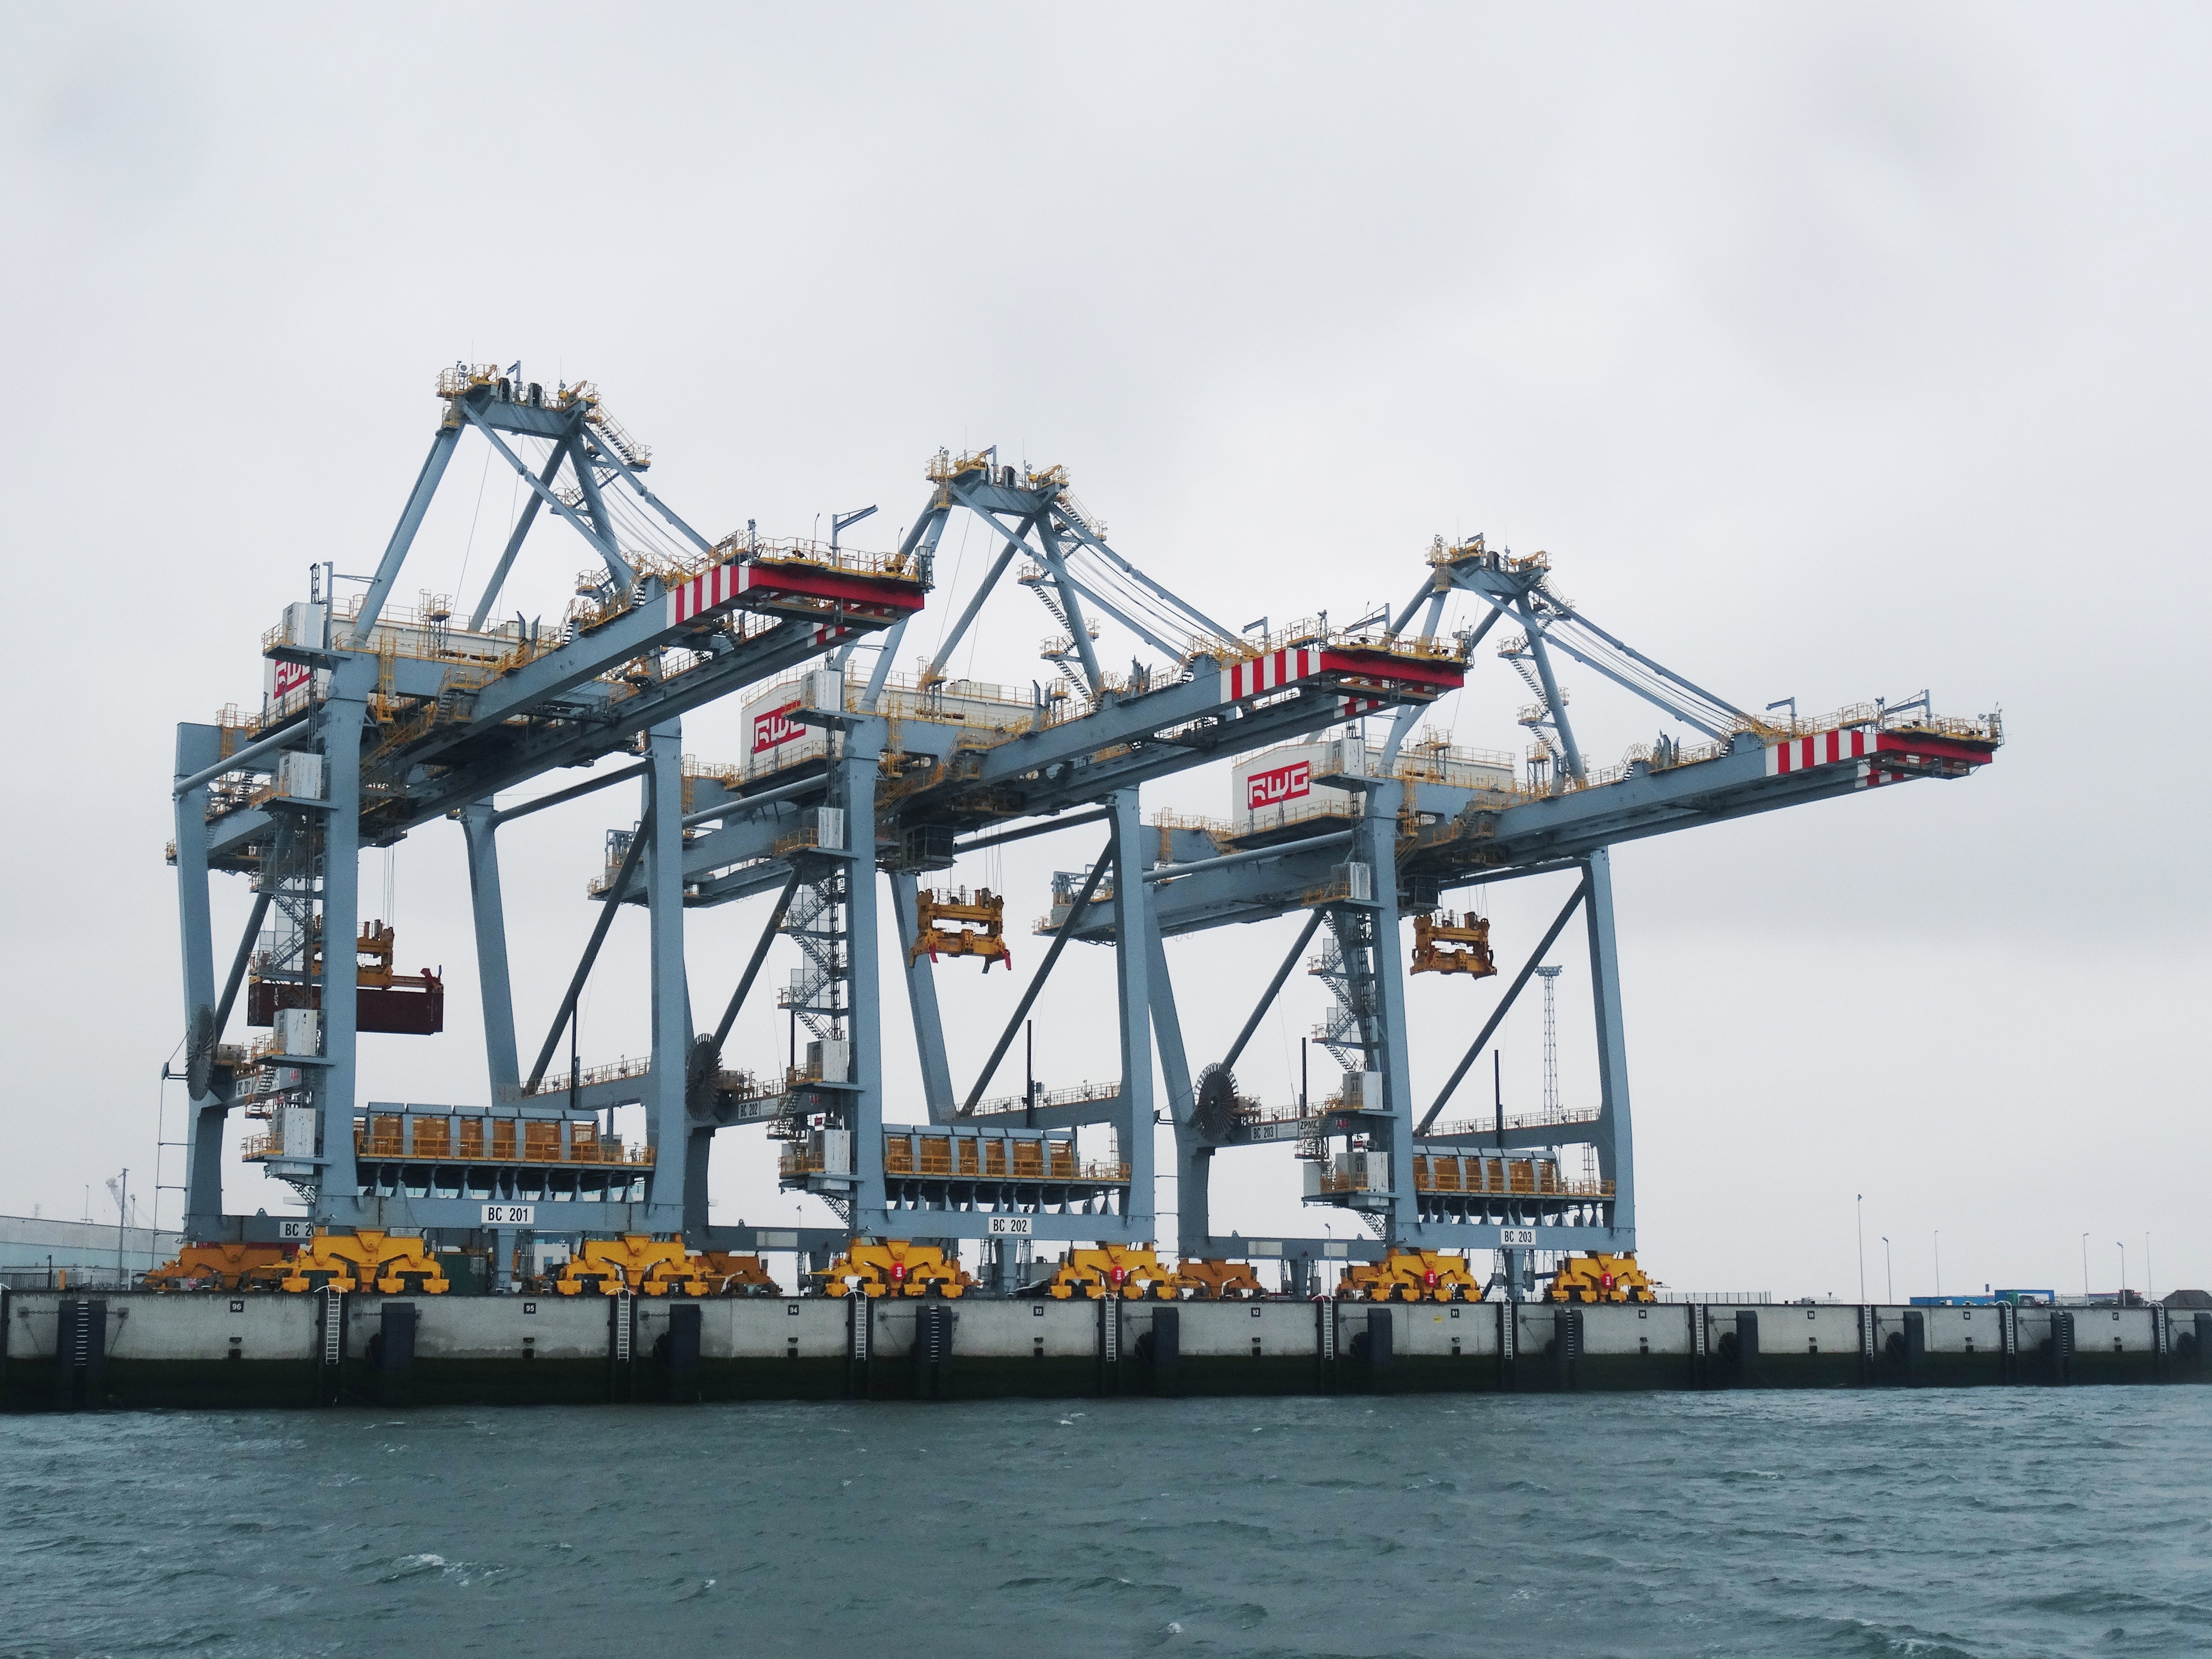 Three large freight cranes on the docks next to sea